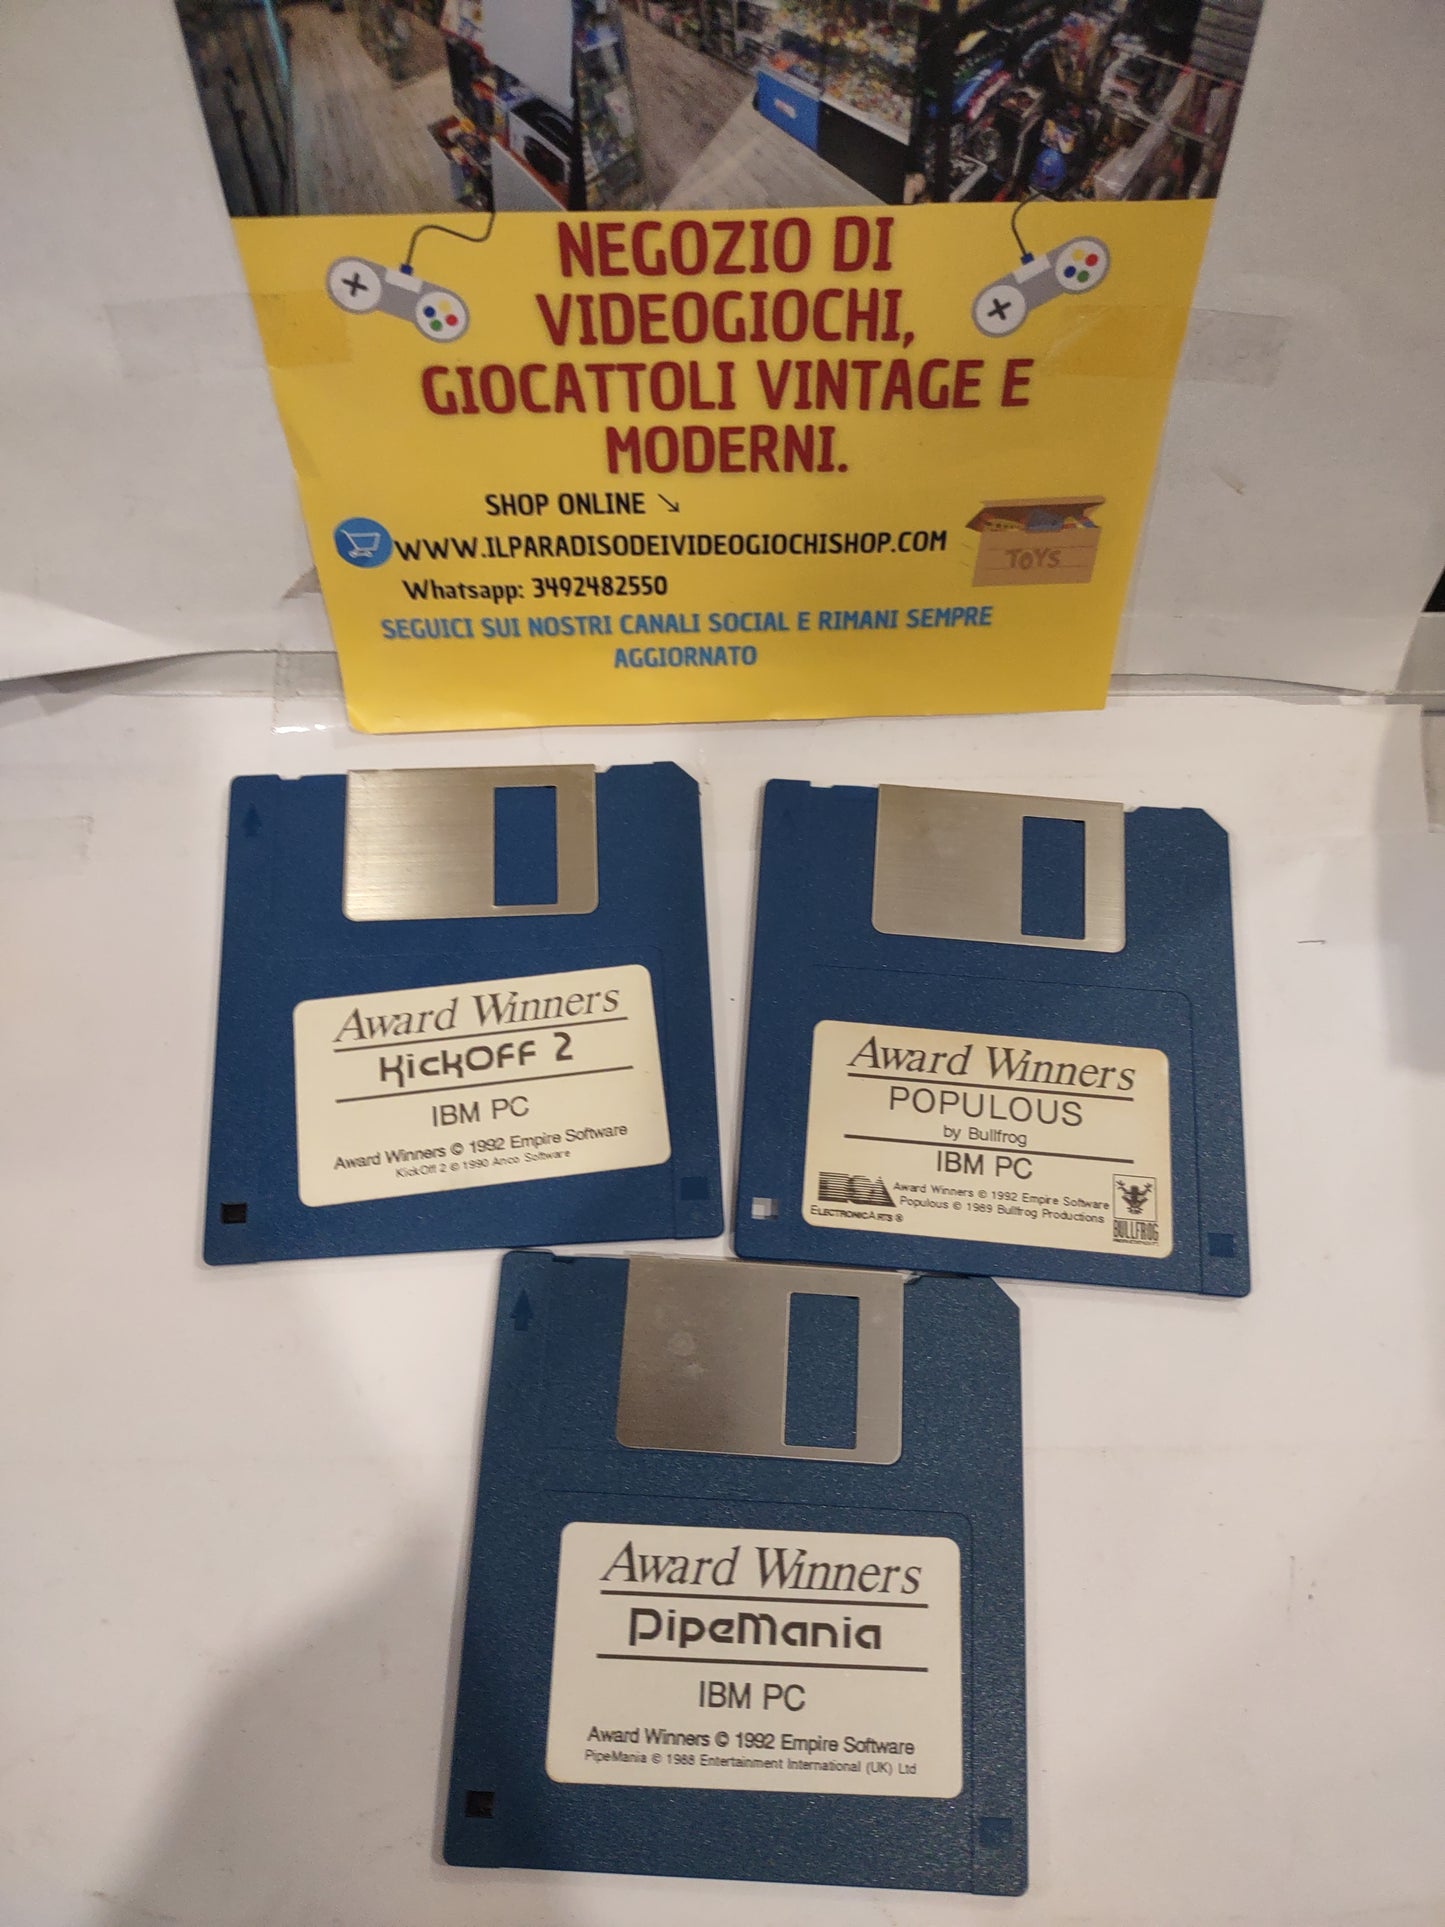 Gioco pc computer Big box award winners definitive games collection IBM PC floppy disk